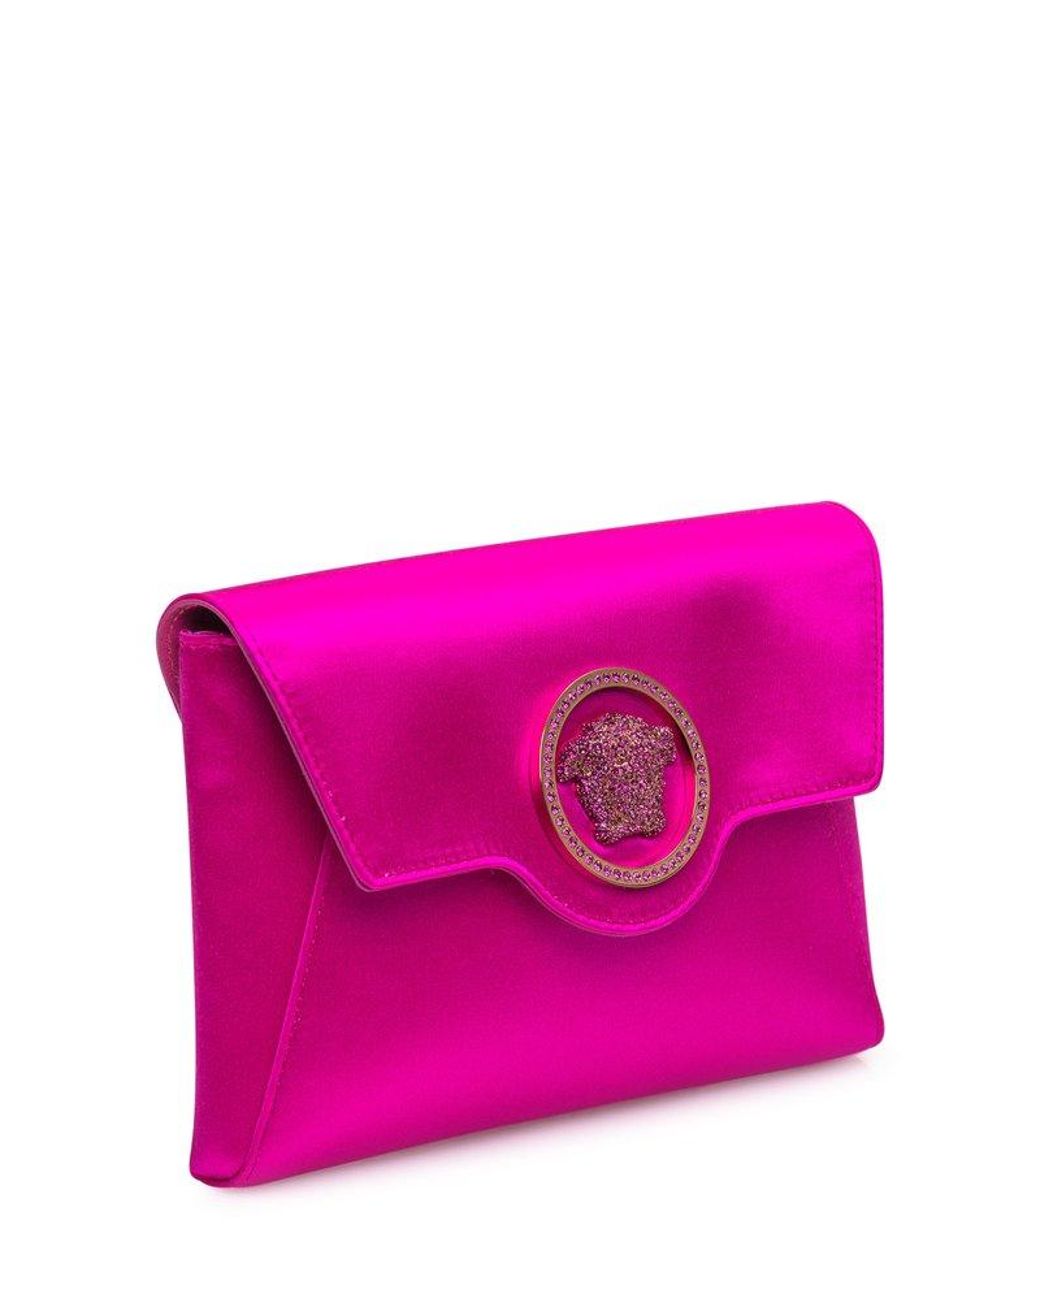 Versace Synthetic Medusa Plaque Foldover Clutch Bag in Black Womens Bags Clutches and evening bags 